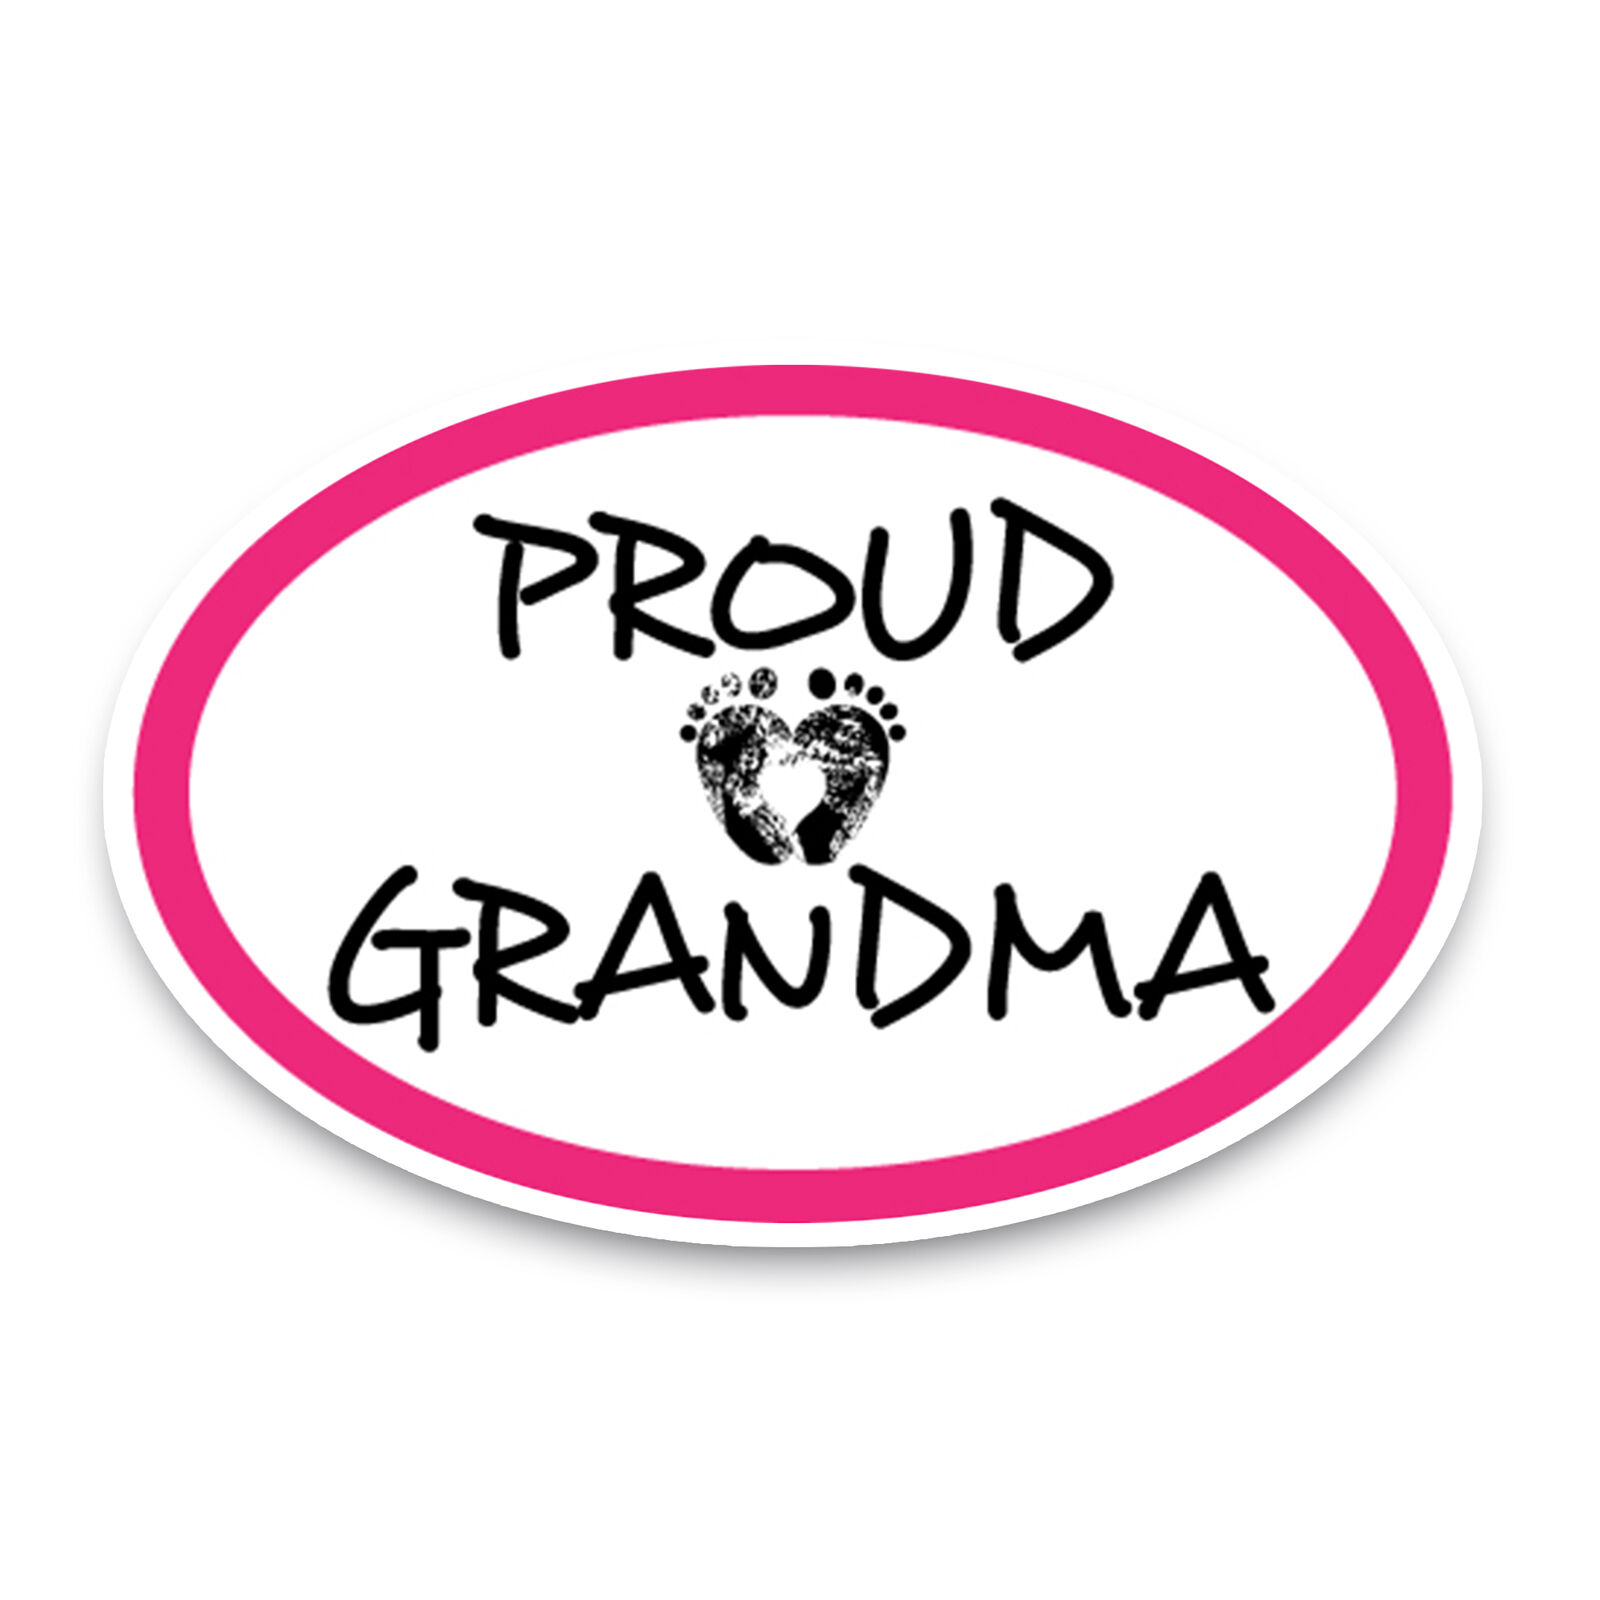 Proud Grandma Pink and White Oval Magnet Decal, 4x6 Inches, Automotive Magnet